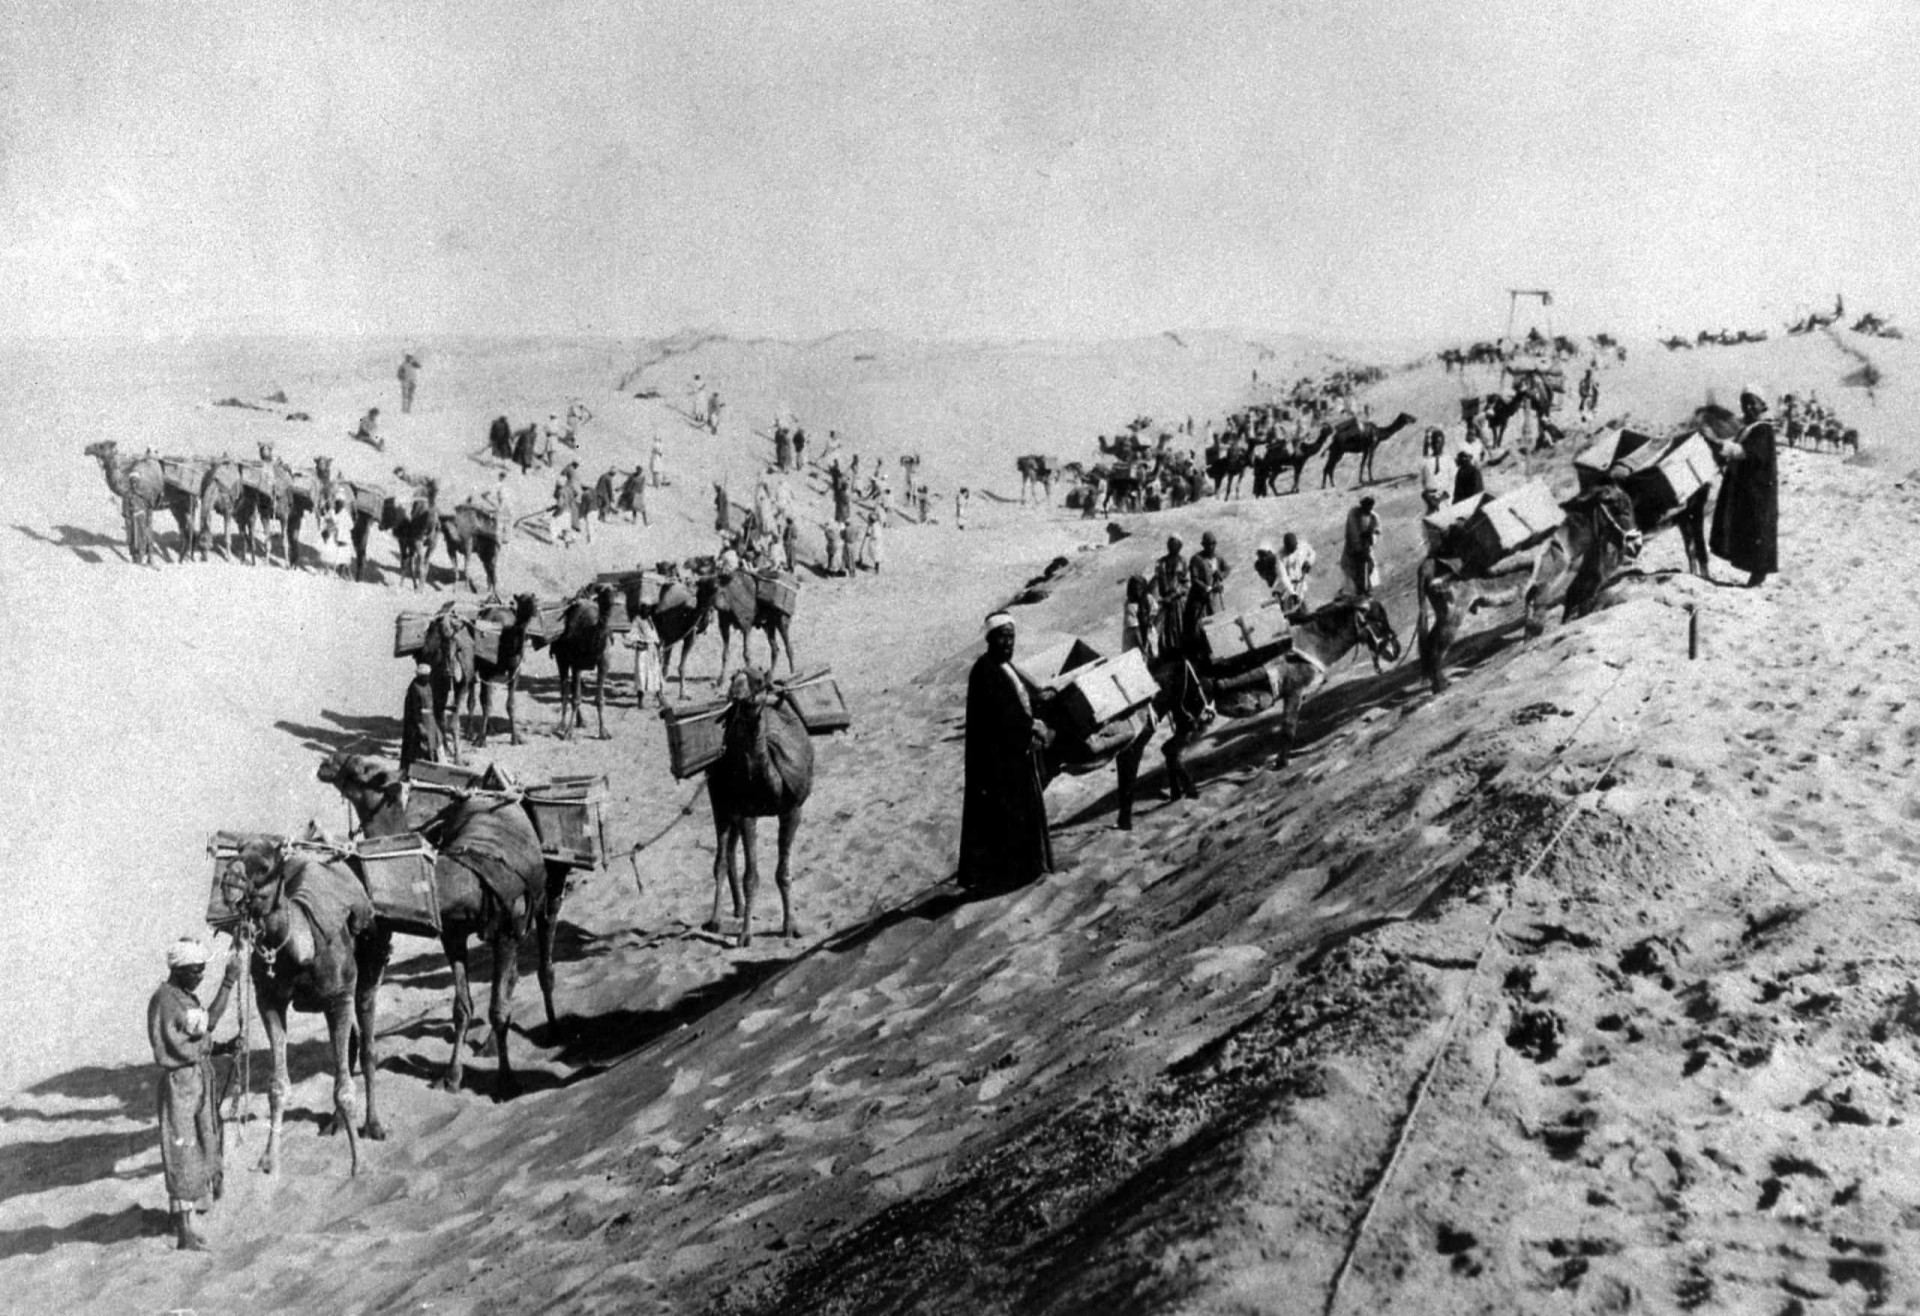 <p>Construction was further delayed after Egyptian ruler Ismail Pasha abruptly banned the use of forced peasant labor in 1863. Faced with a severe reduction in manpower, Lesseps and the Suez Canal Company were compelled to use several hundred custom-made steam- and coal-powered shovels and dredgers to dig and widen the canal.</p>